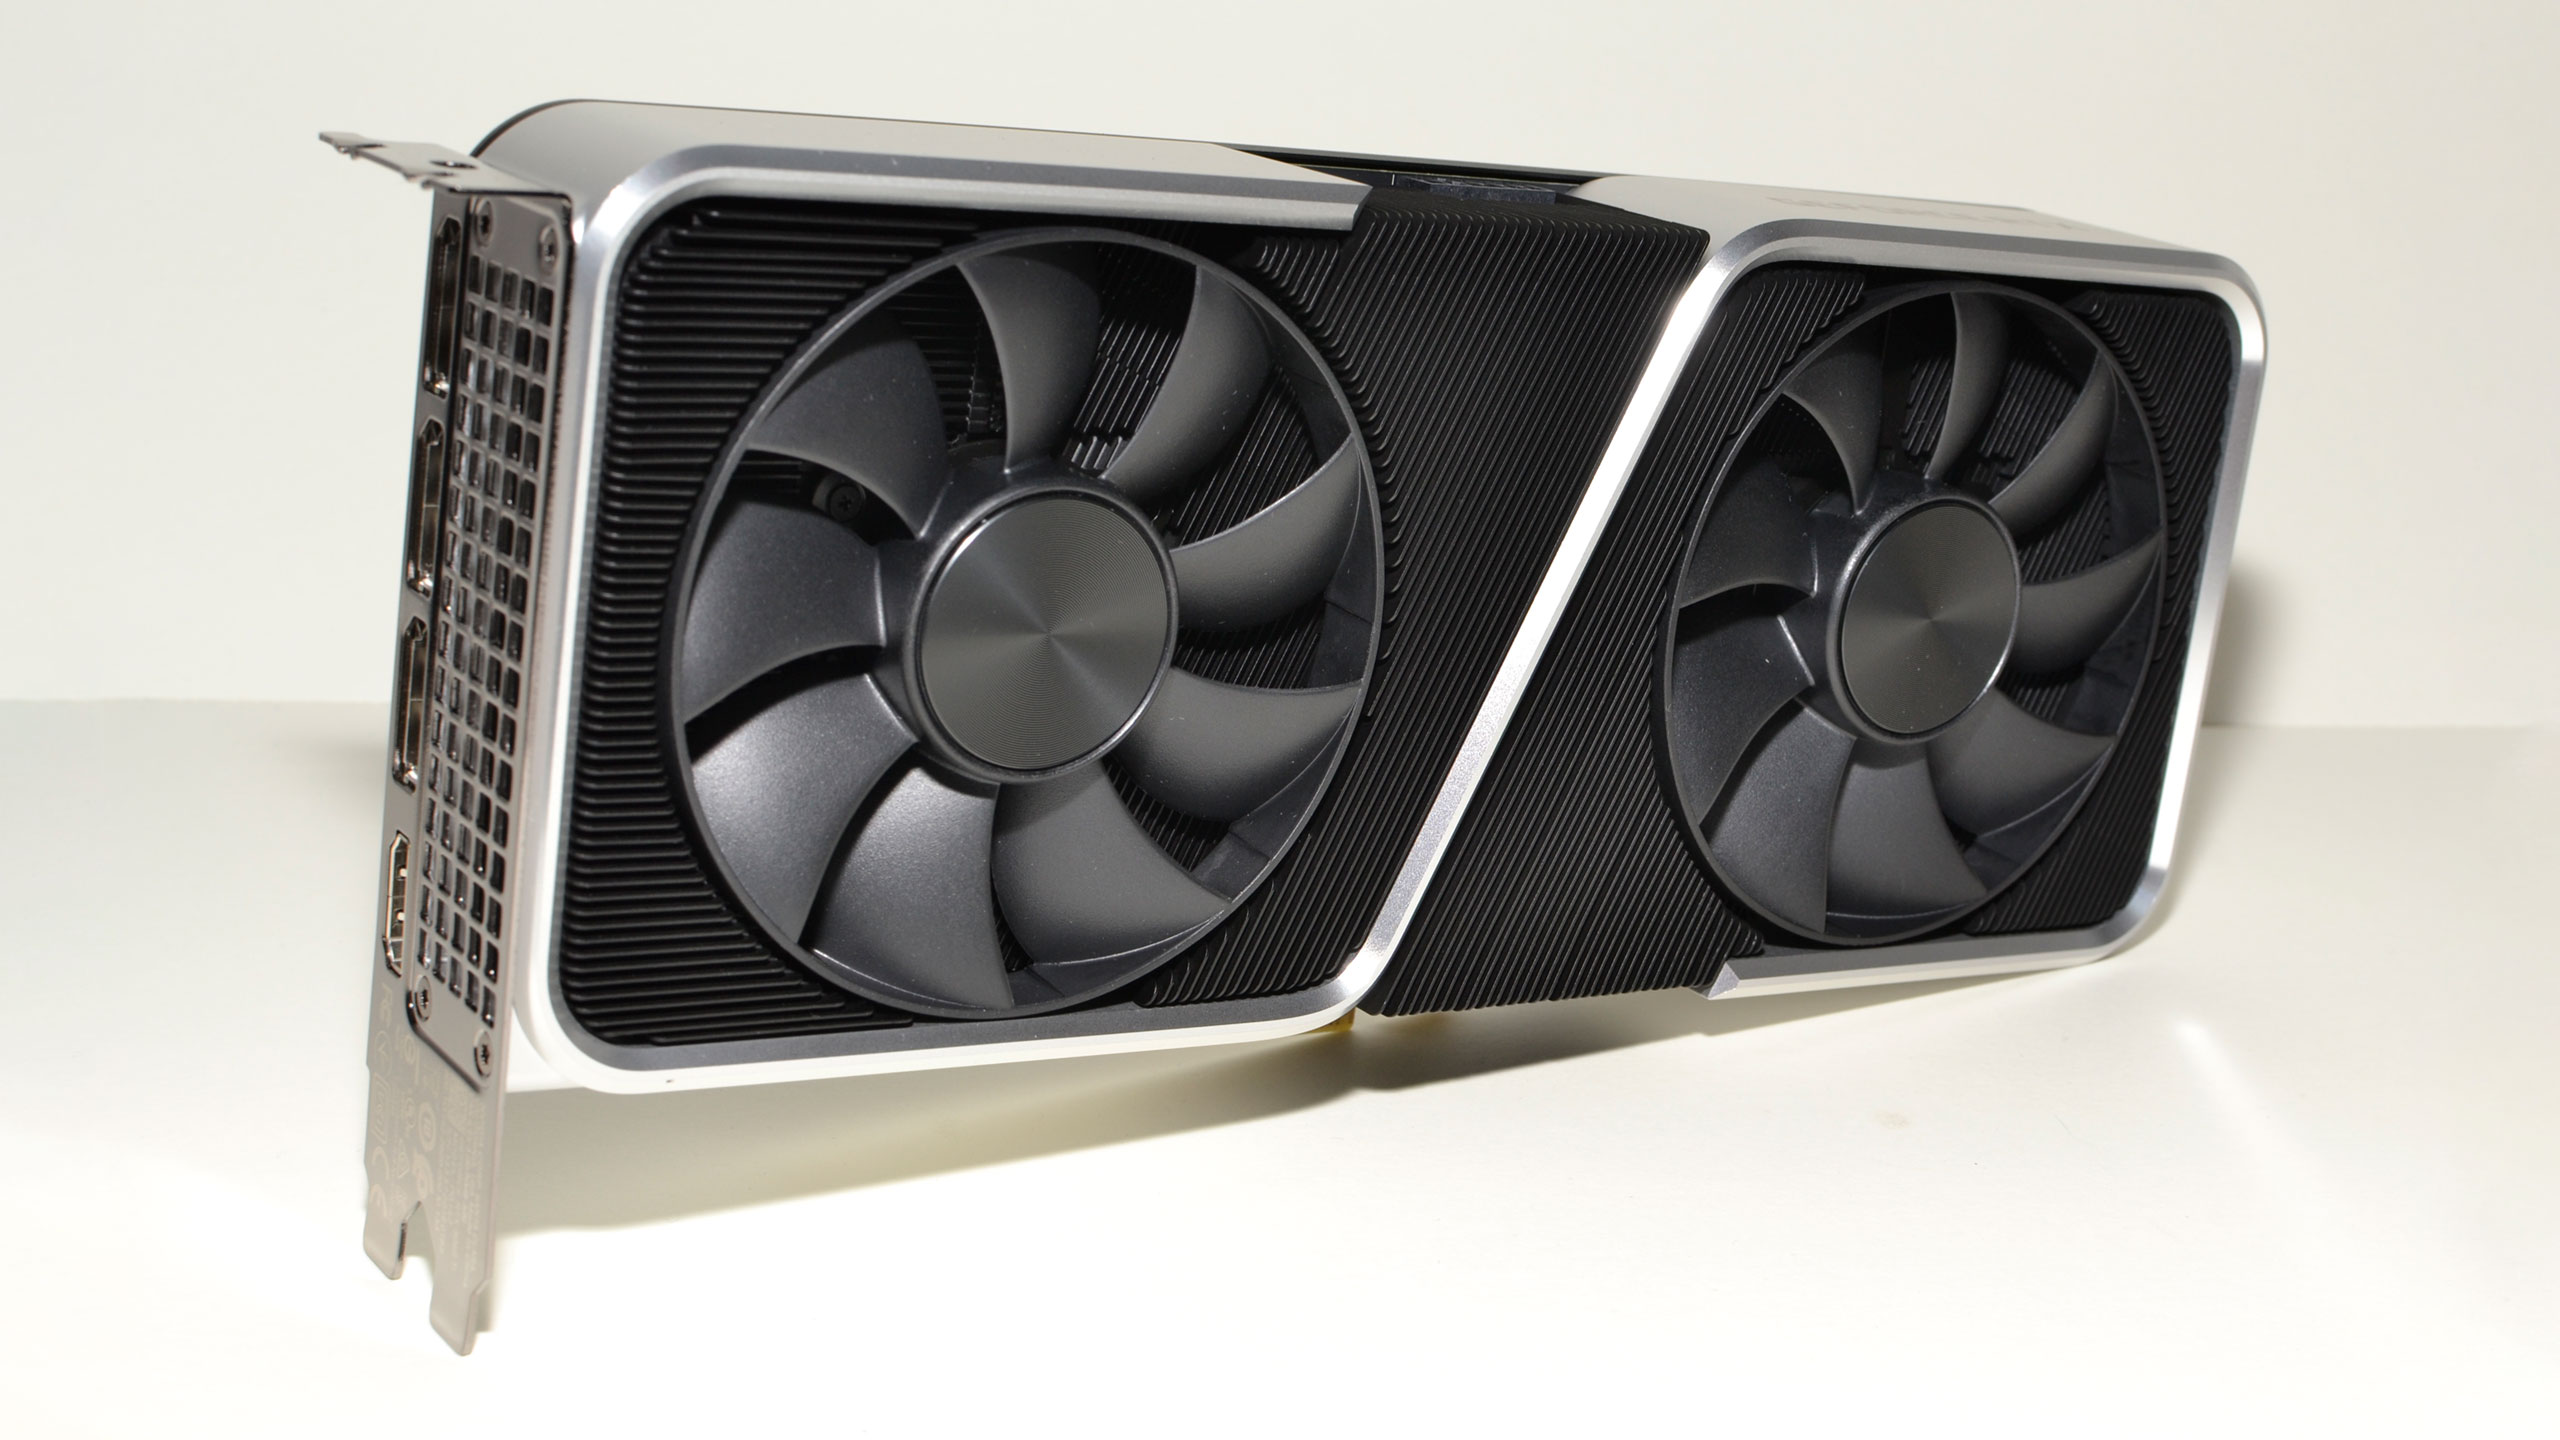 Geforce 3060 ti founders edition. RTX 3060 ti founders Edition. 3060ti founders Edition.